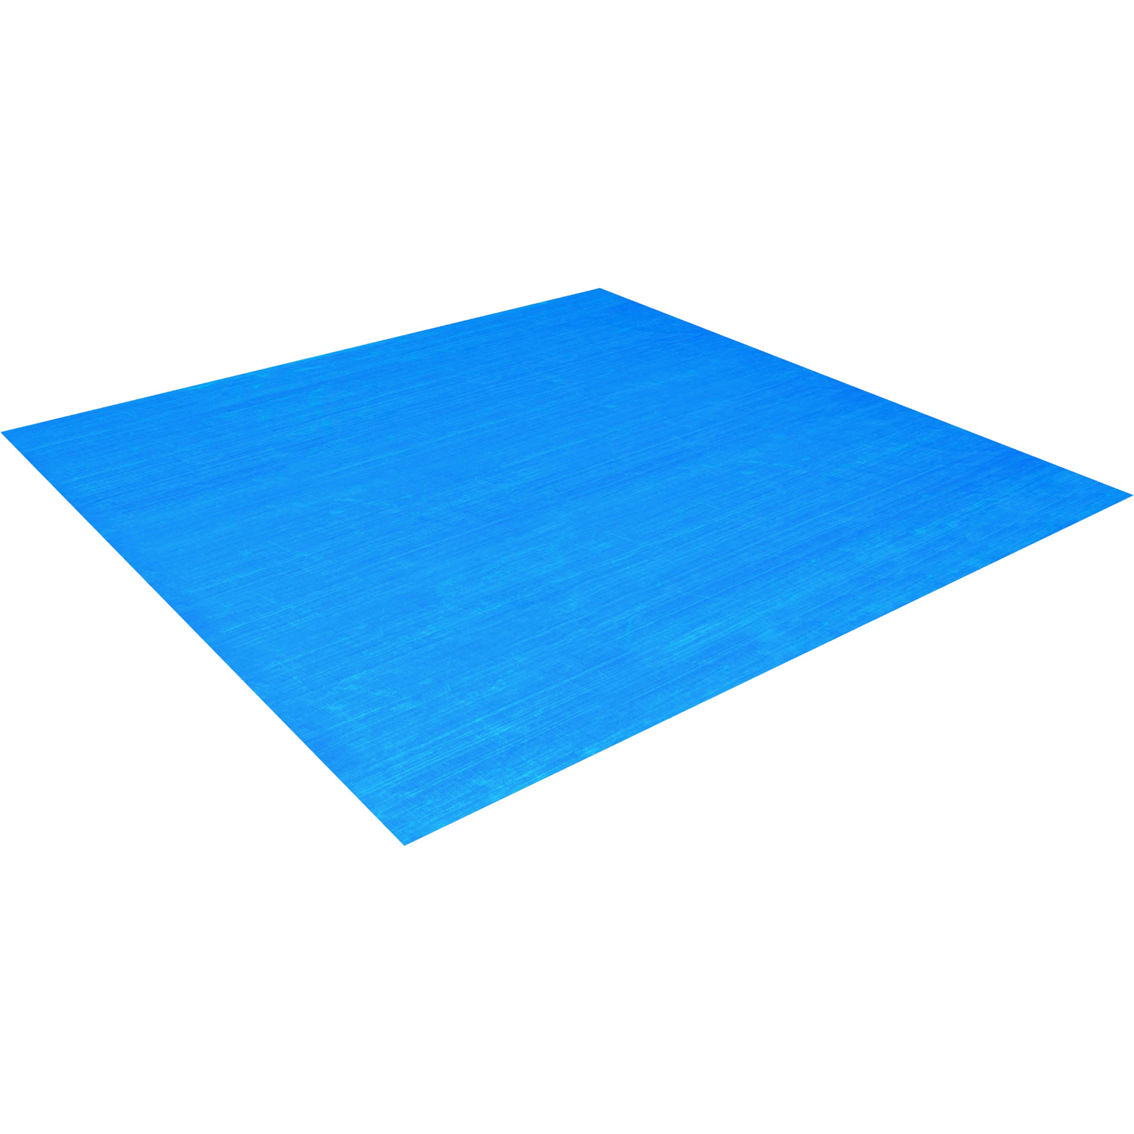 Bestway Flowclear 11 x 11 ft. Ground Cloth - Image 2 of 7